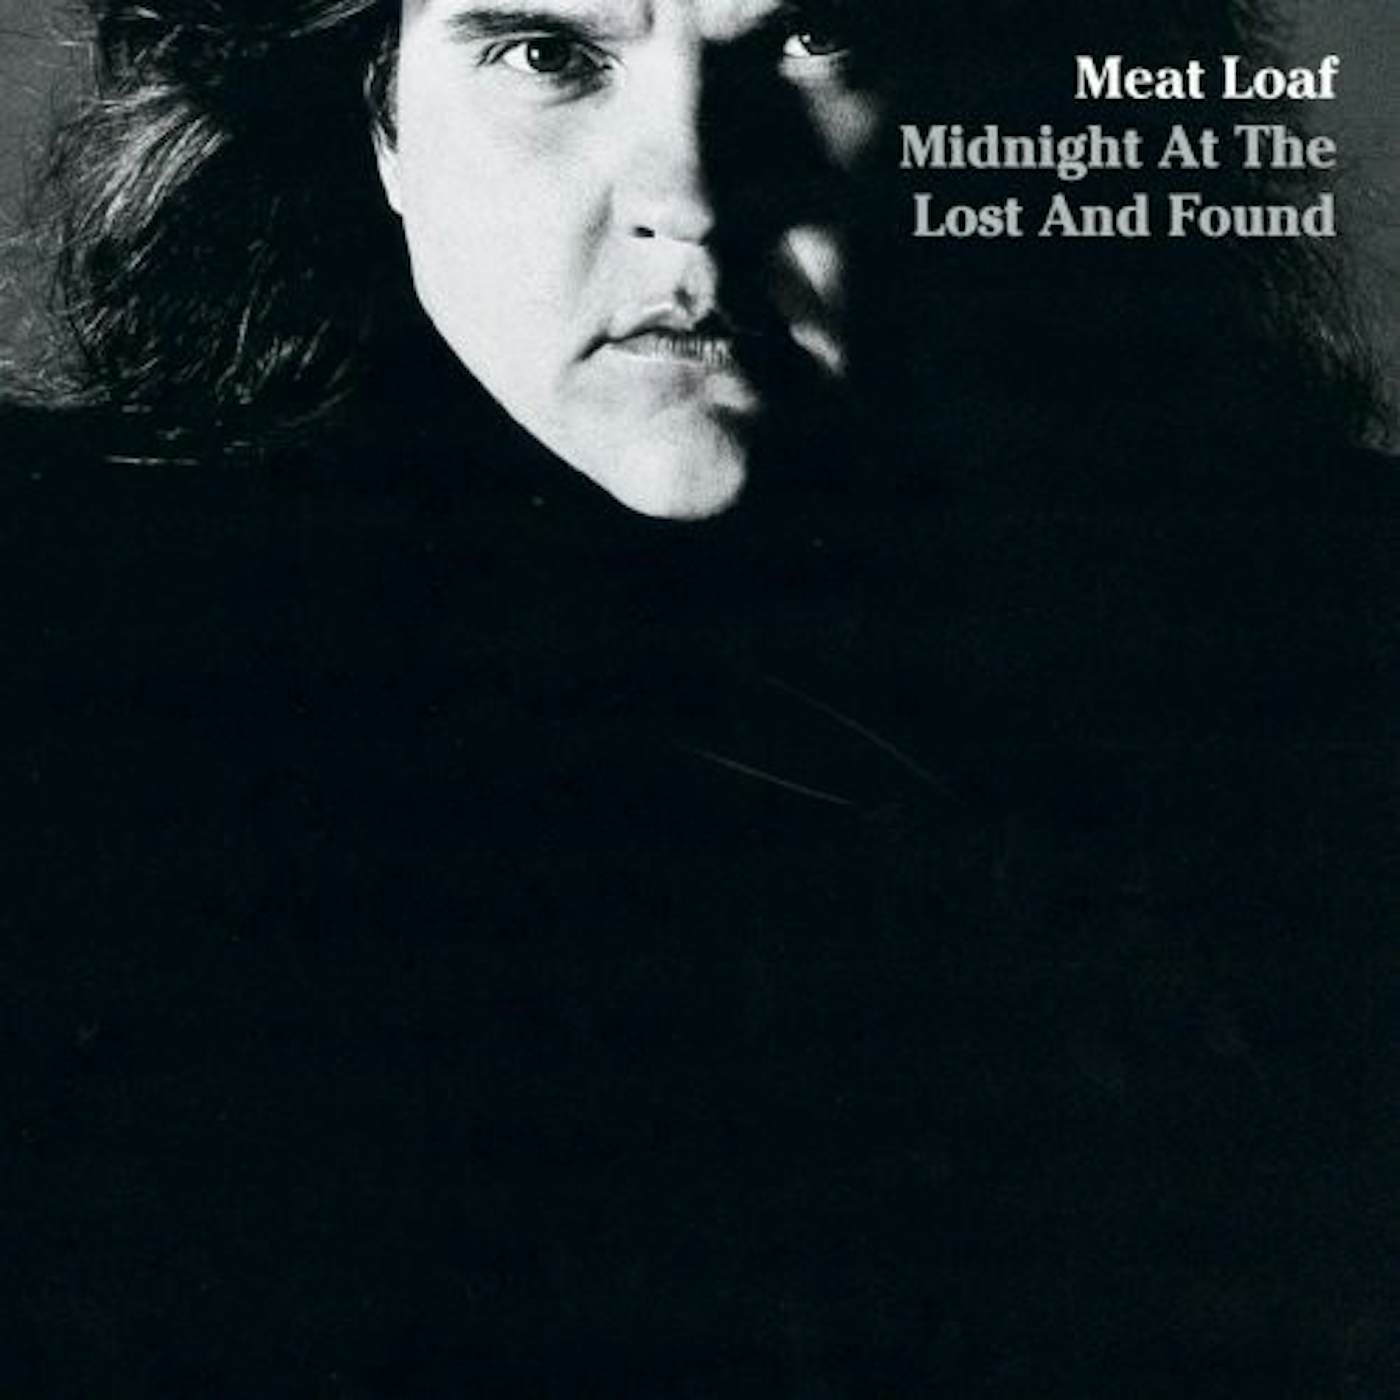 Meat Loaf MIDNIGHT AT THE LOST & FOUND CD